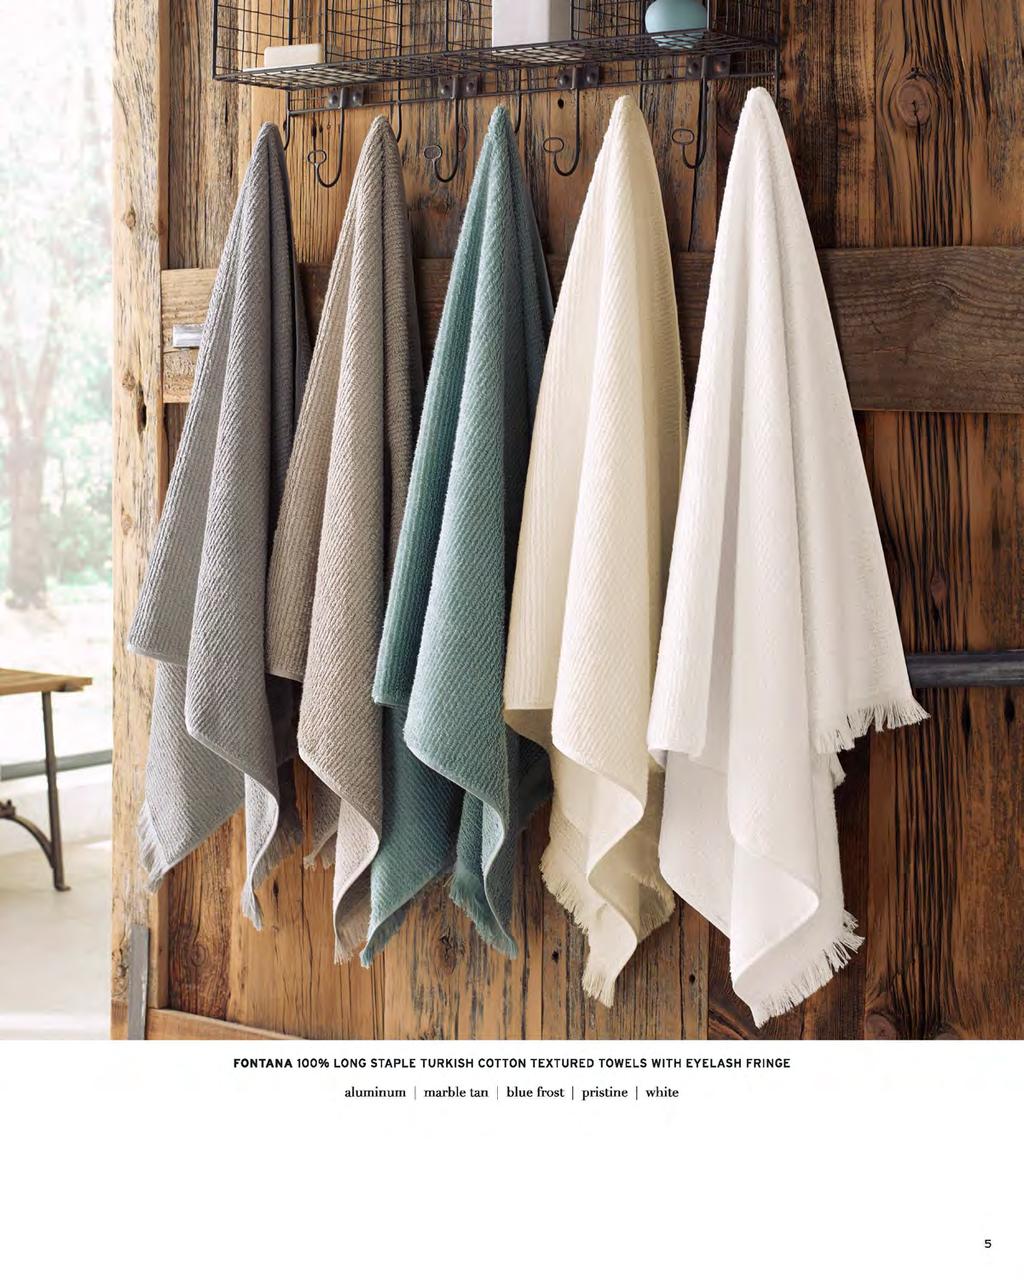 FONTANA 100% LONG STAPLE TURKISH COTTON TEXTURED TOWELS WITH